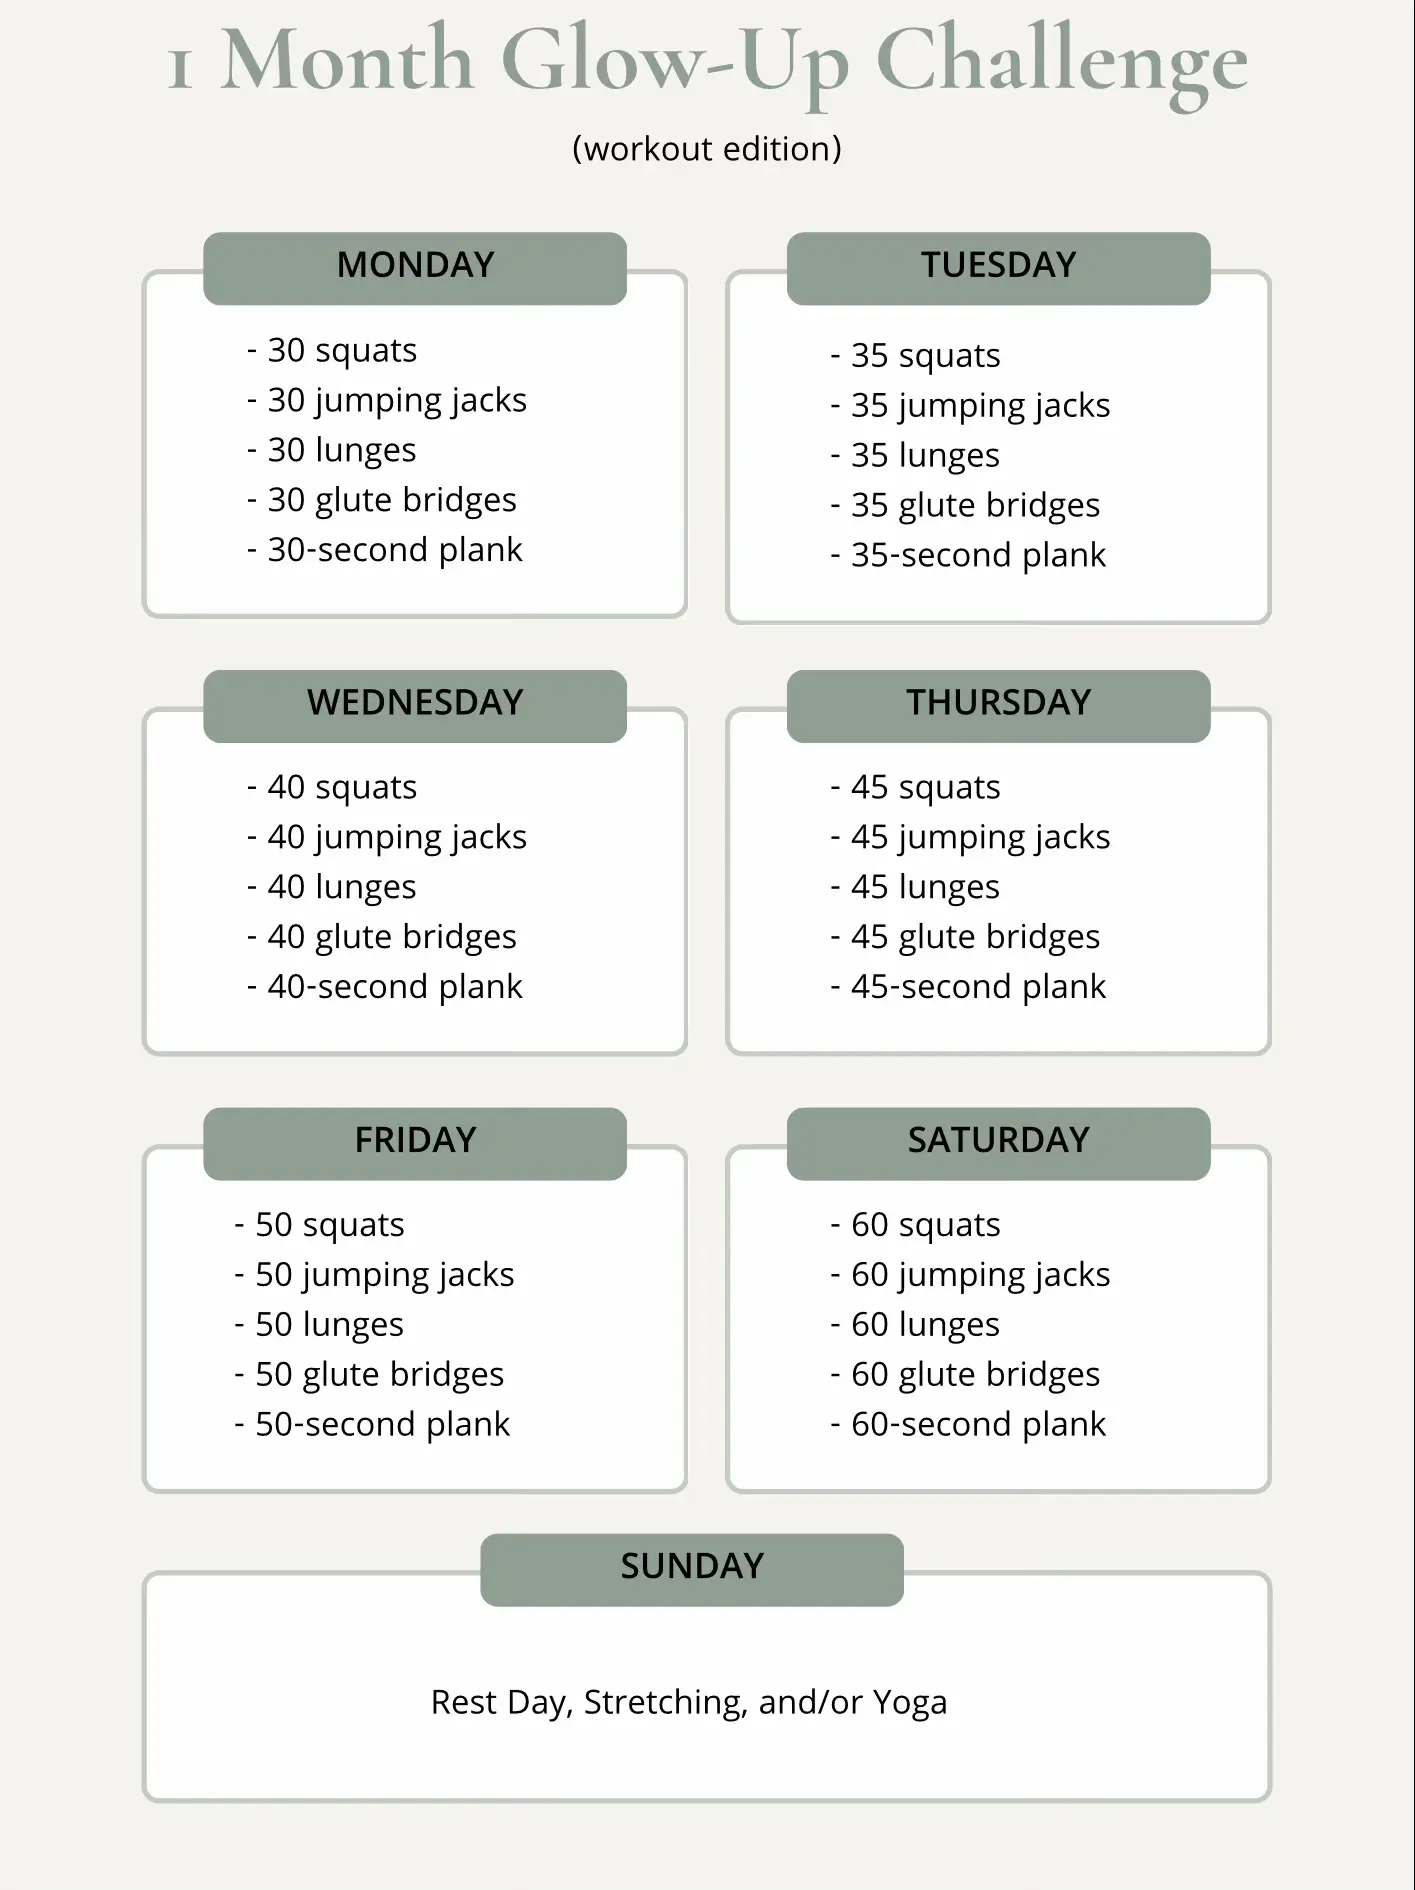 30 Day Challenges For A Bigger Butt 🍑, Bigger Boobs 😋, Flat